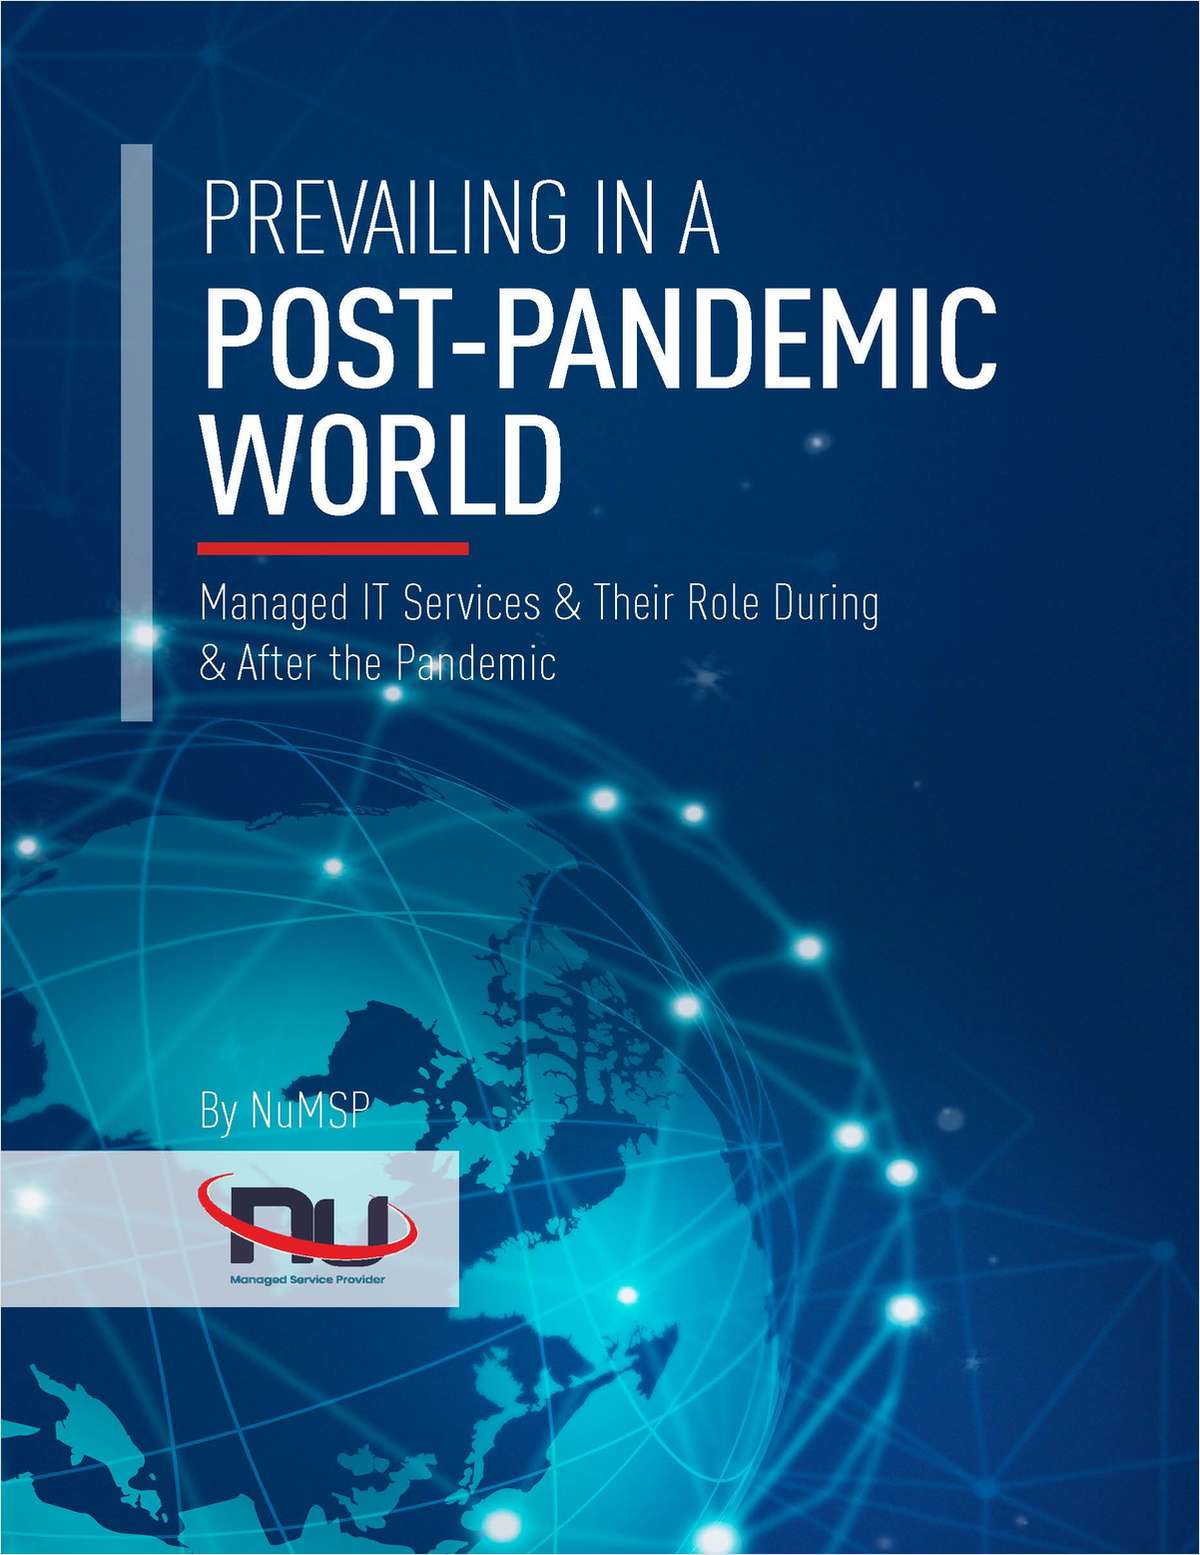 PREVAILING IN A POST-PANDEMIC WORLD